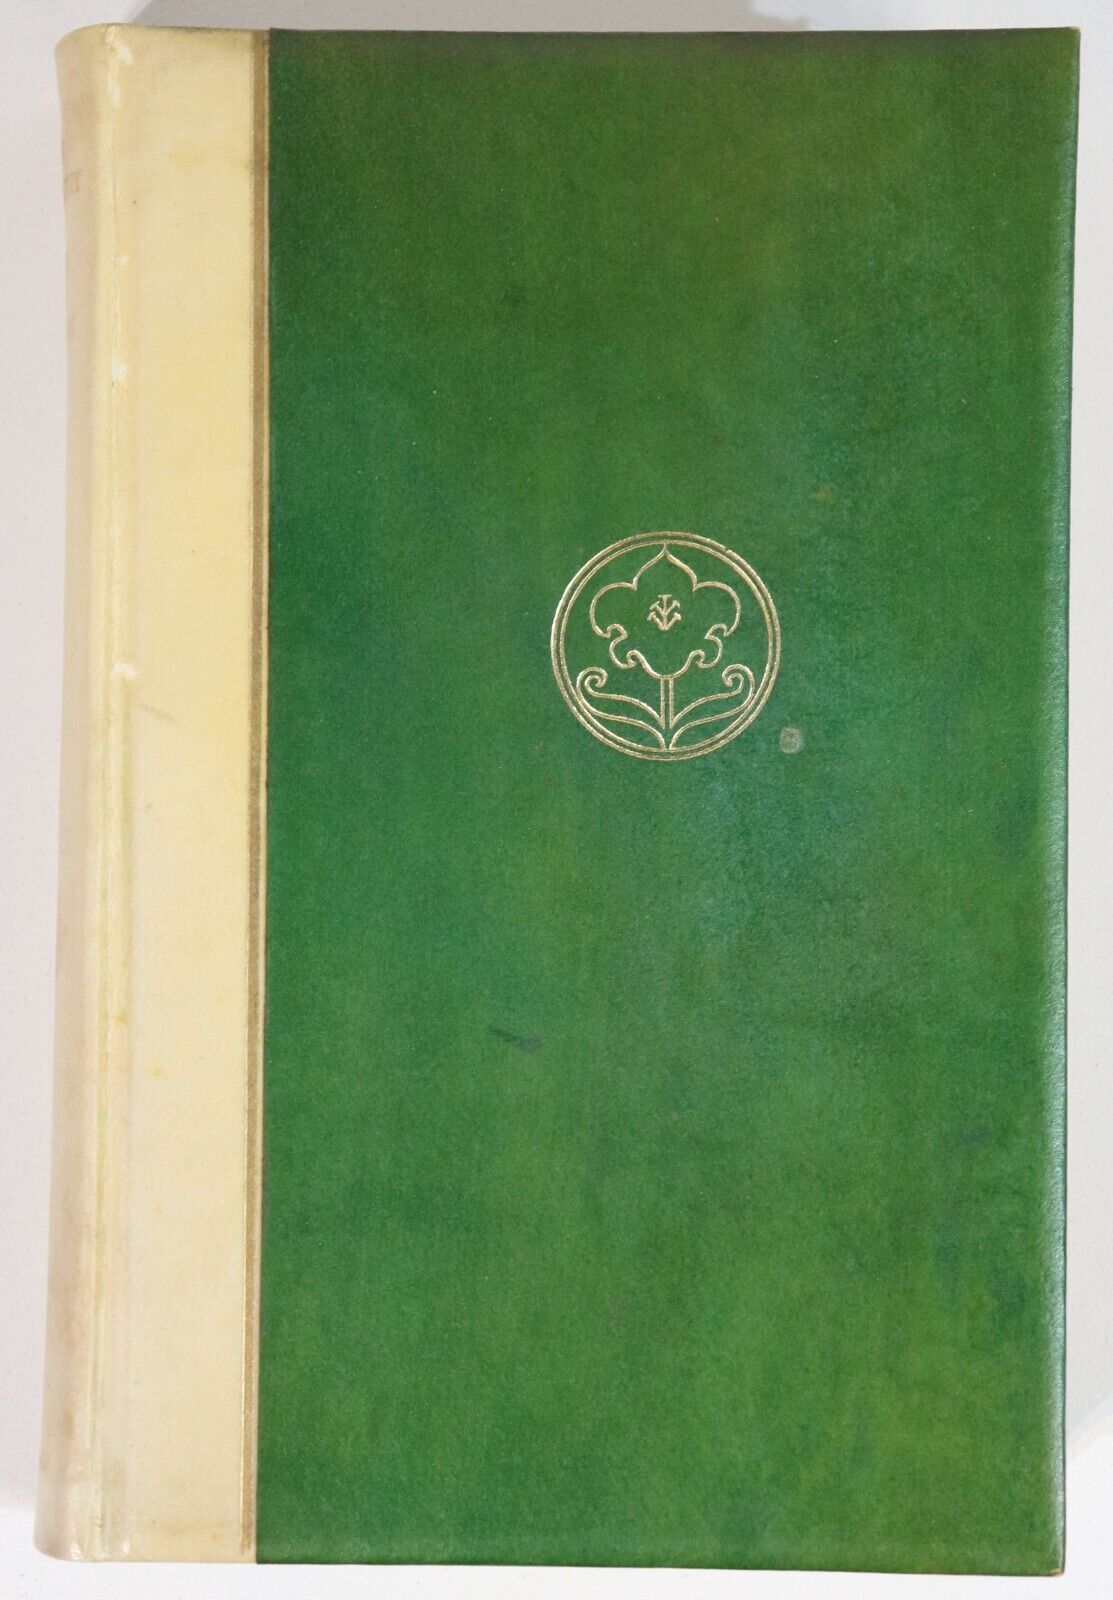 Maid In Waiting by John Galsworthy - 1931 - Ltd Ed. Signed by Author Book